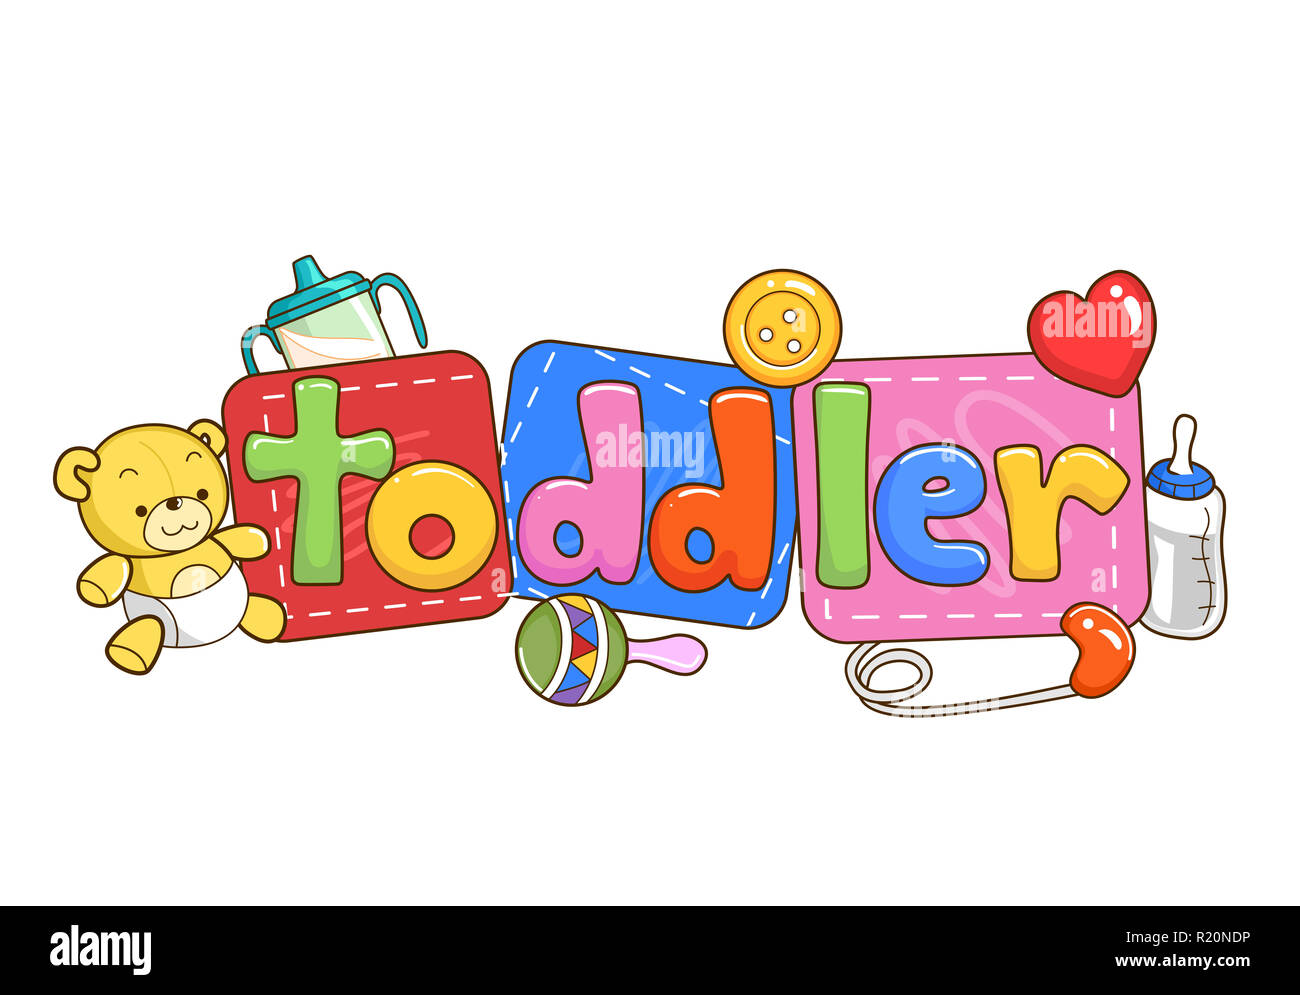 Colorful Typography Illustration Featuring a Stuffed Bear Sitting Beside Letter Tiles That Spell Out the Word Toddler Stock Photo